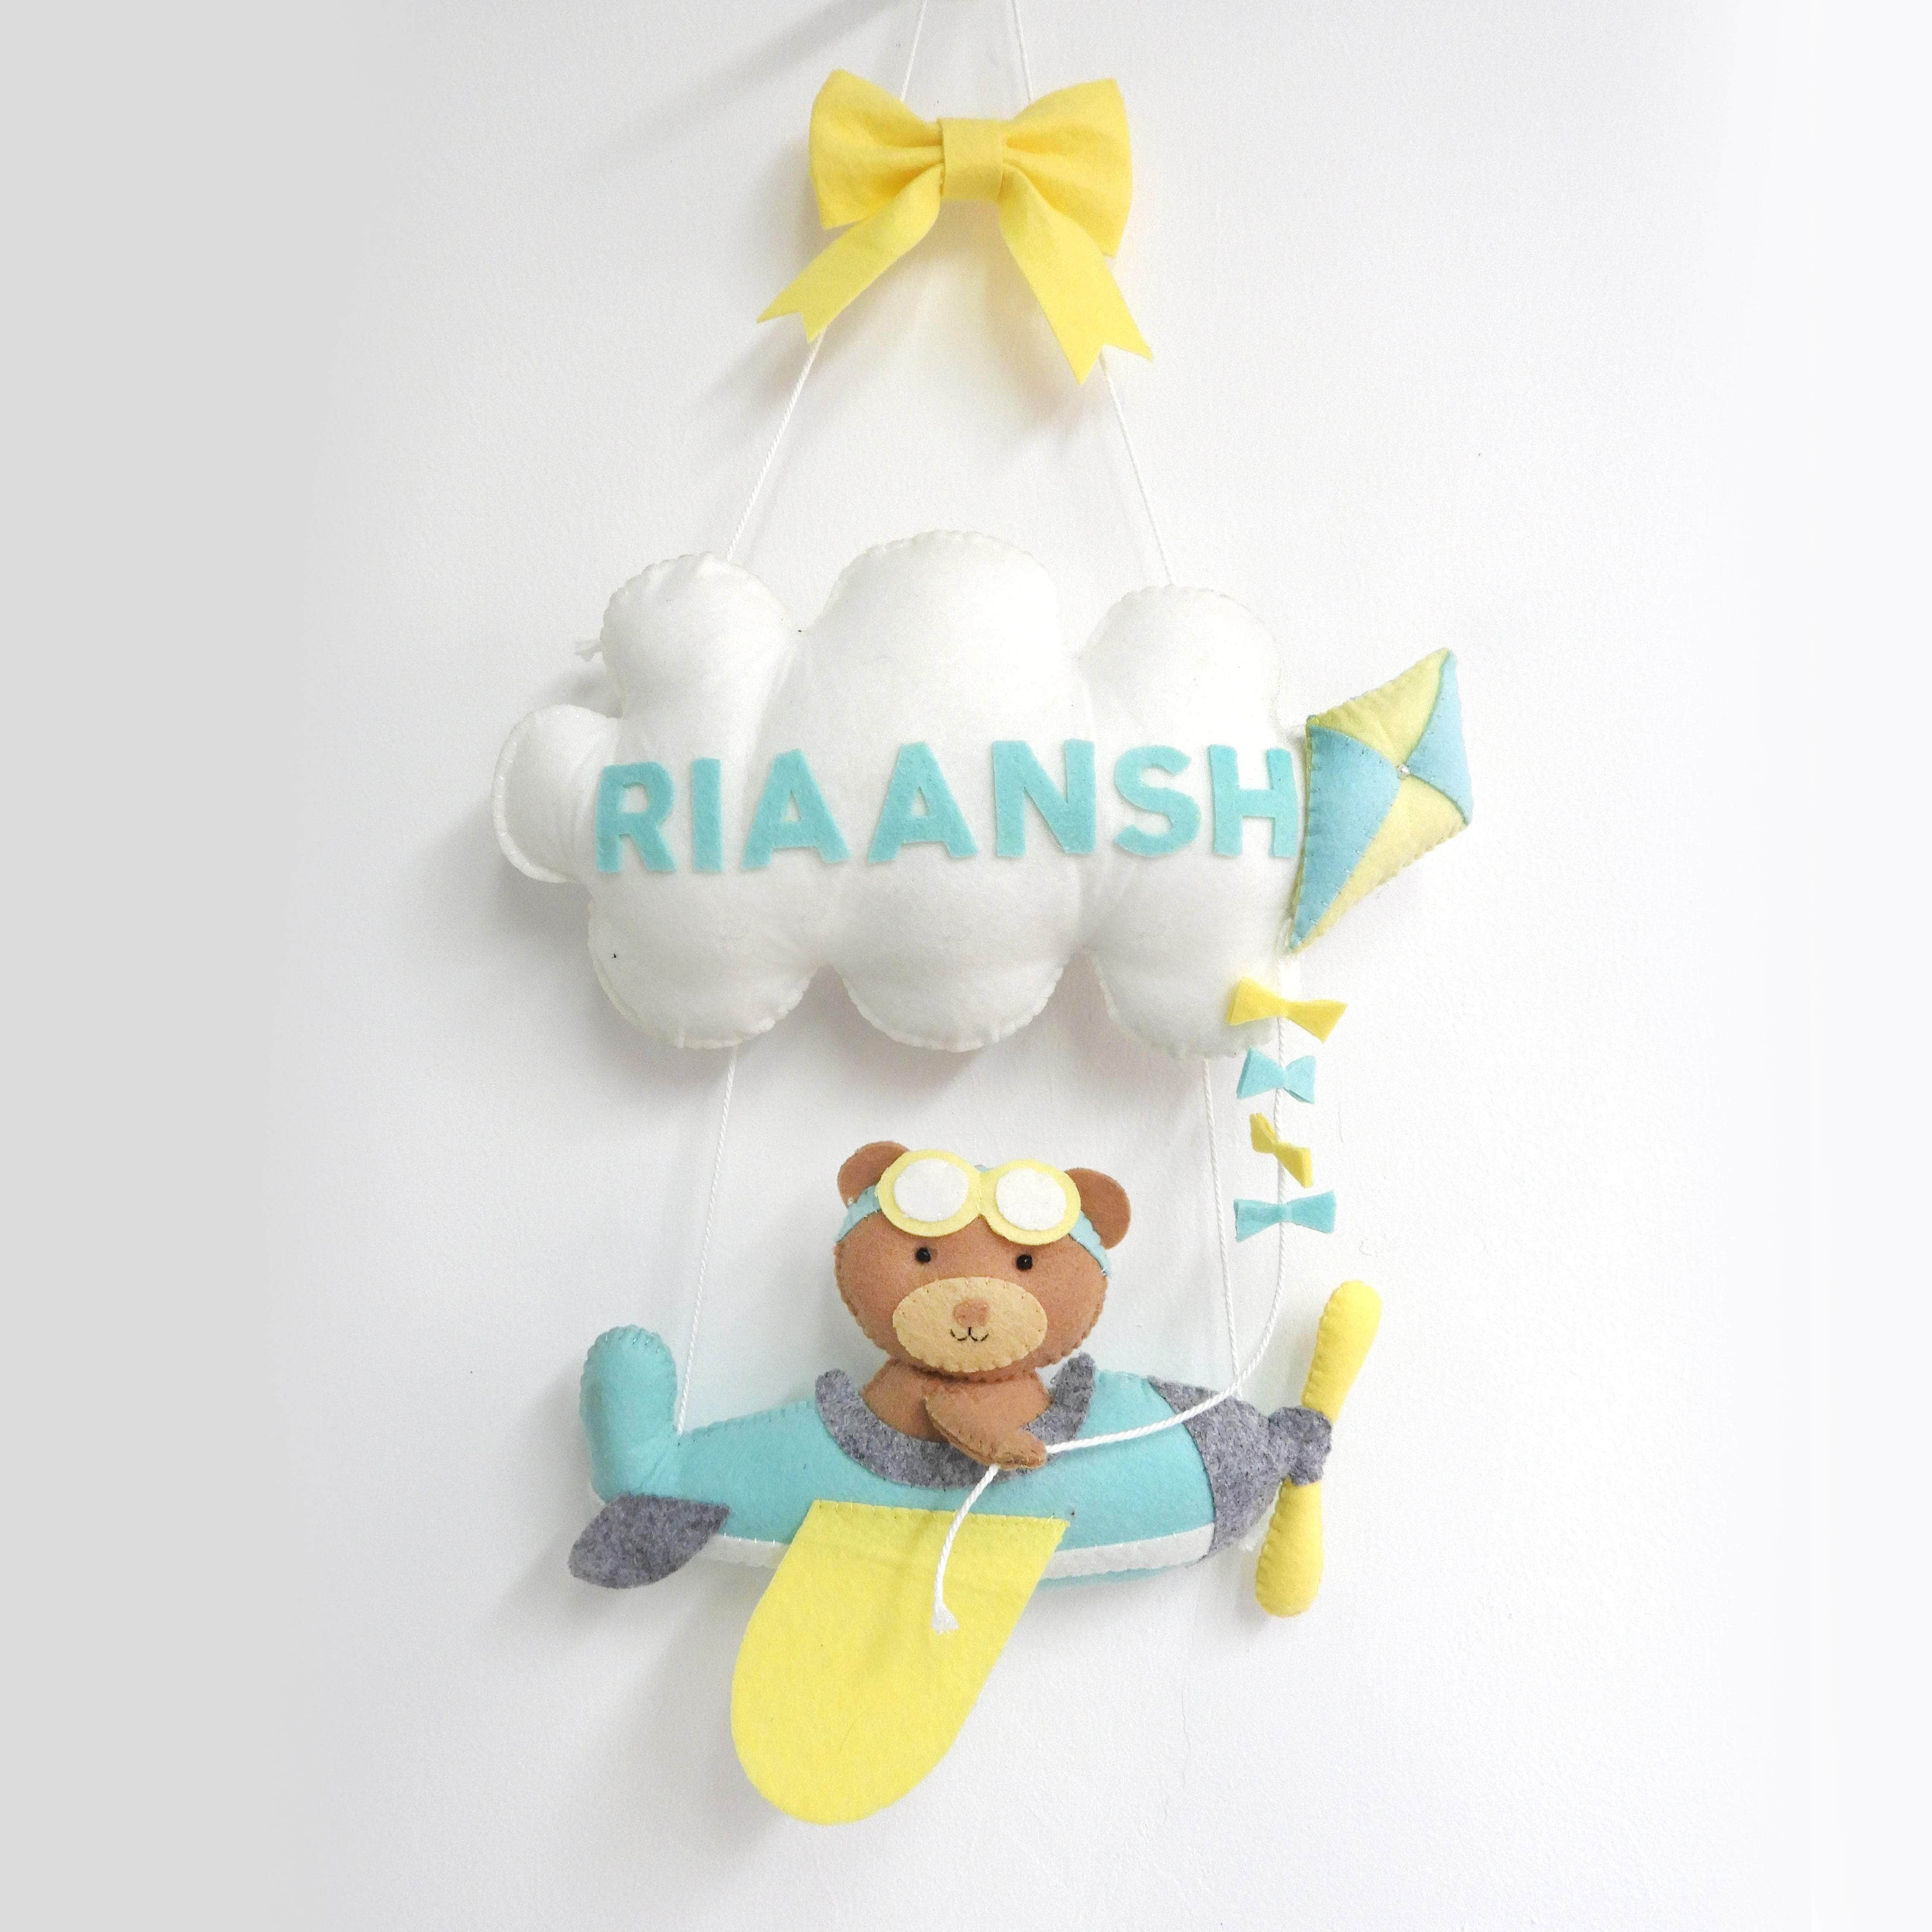 Naming Day Gift, Christening for Girls, Naming Ceremony Gift, Christening  Gifts From Godparents, Baptism Gift Boy, Ornament - Etsy